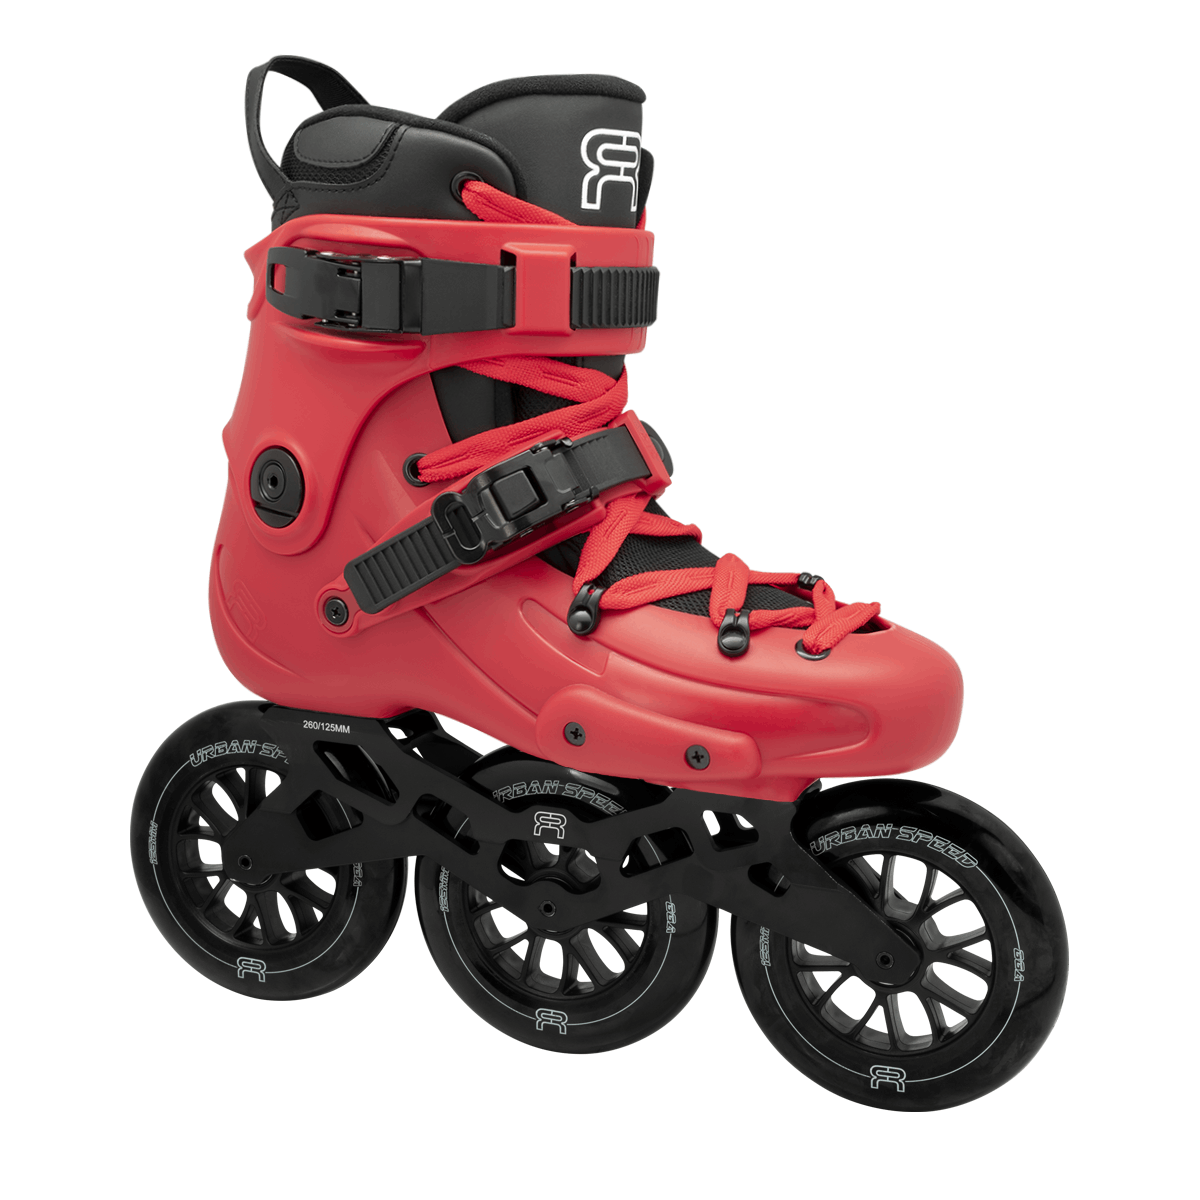 FR1 325 red inline skate with 3 big wheels of 125mm